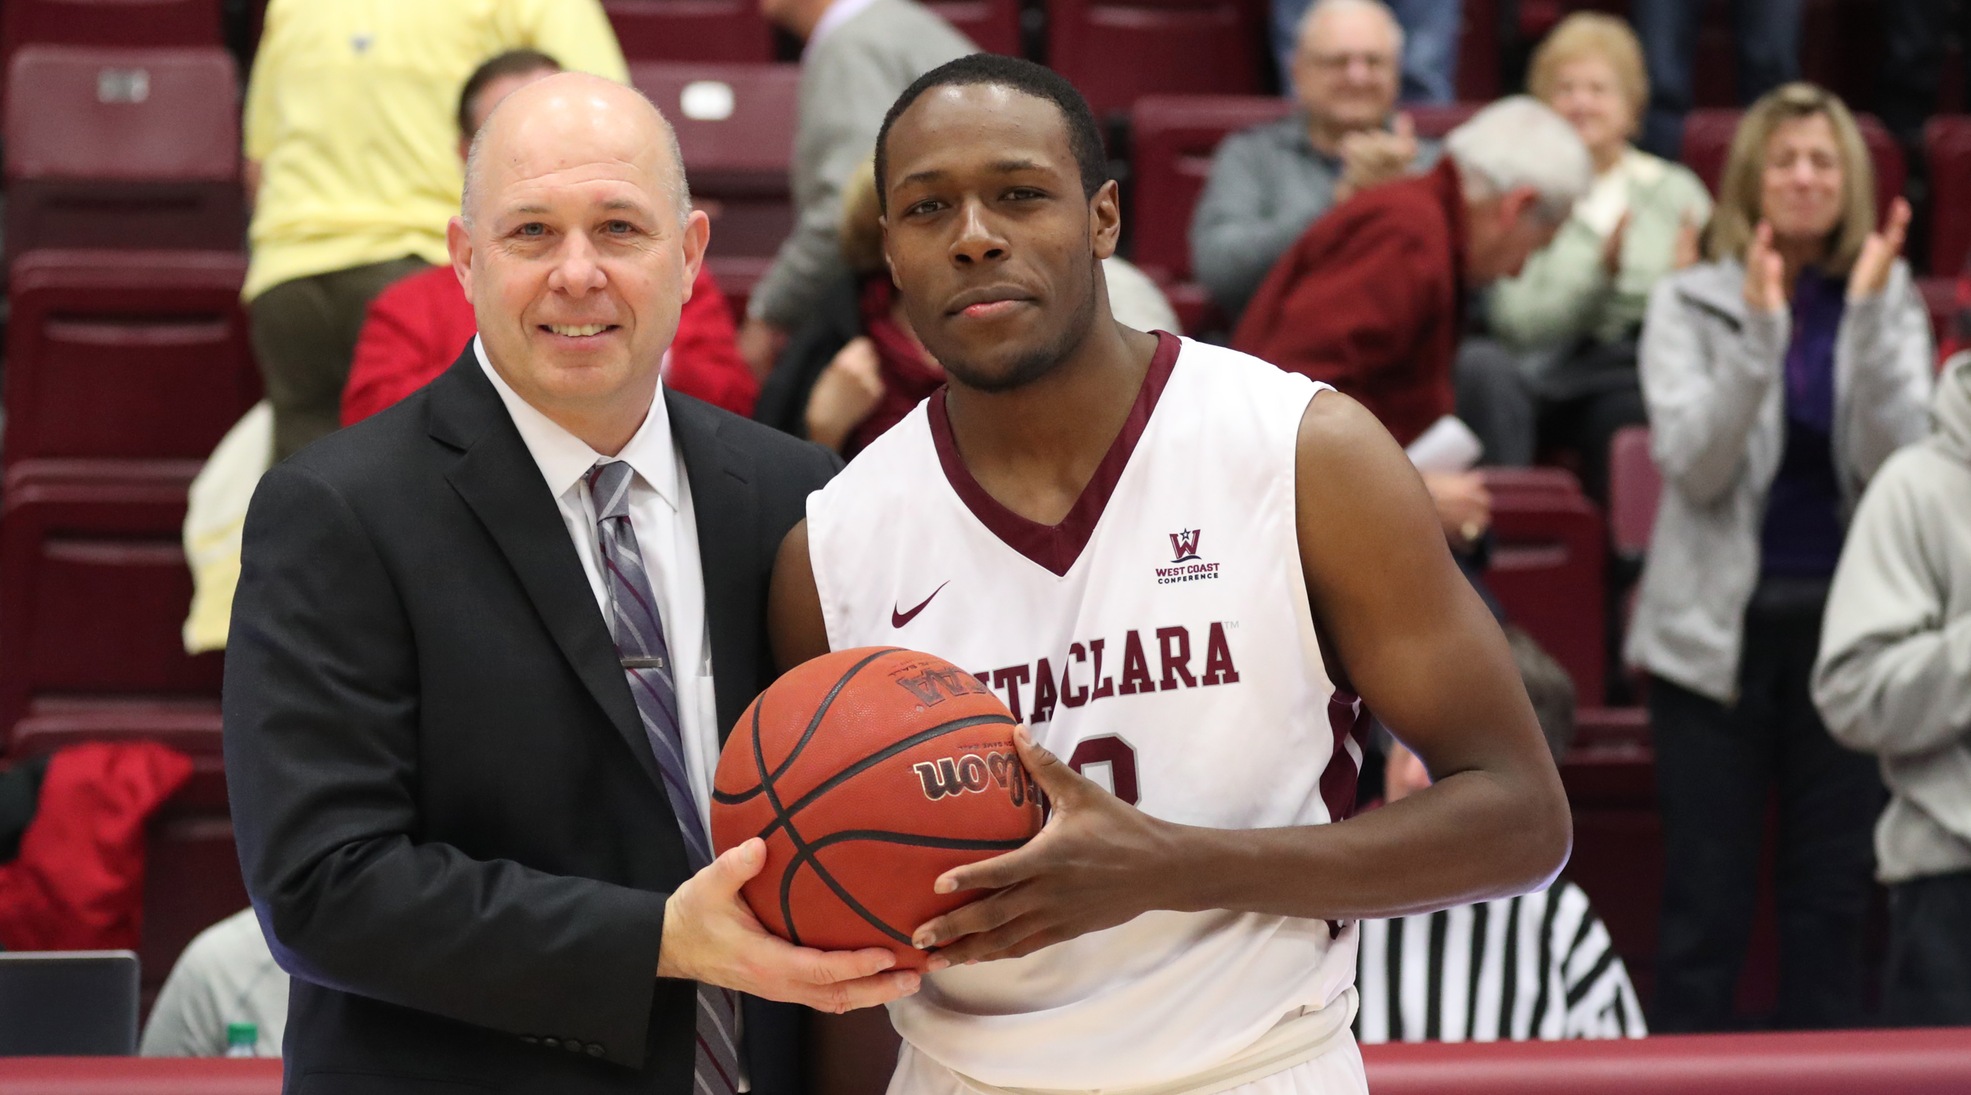 Herb Sendek presented Jared Brownridge with the game ball for reaching 2,000 career points.